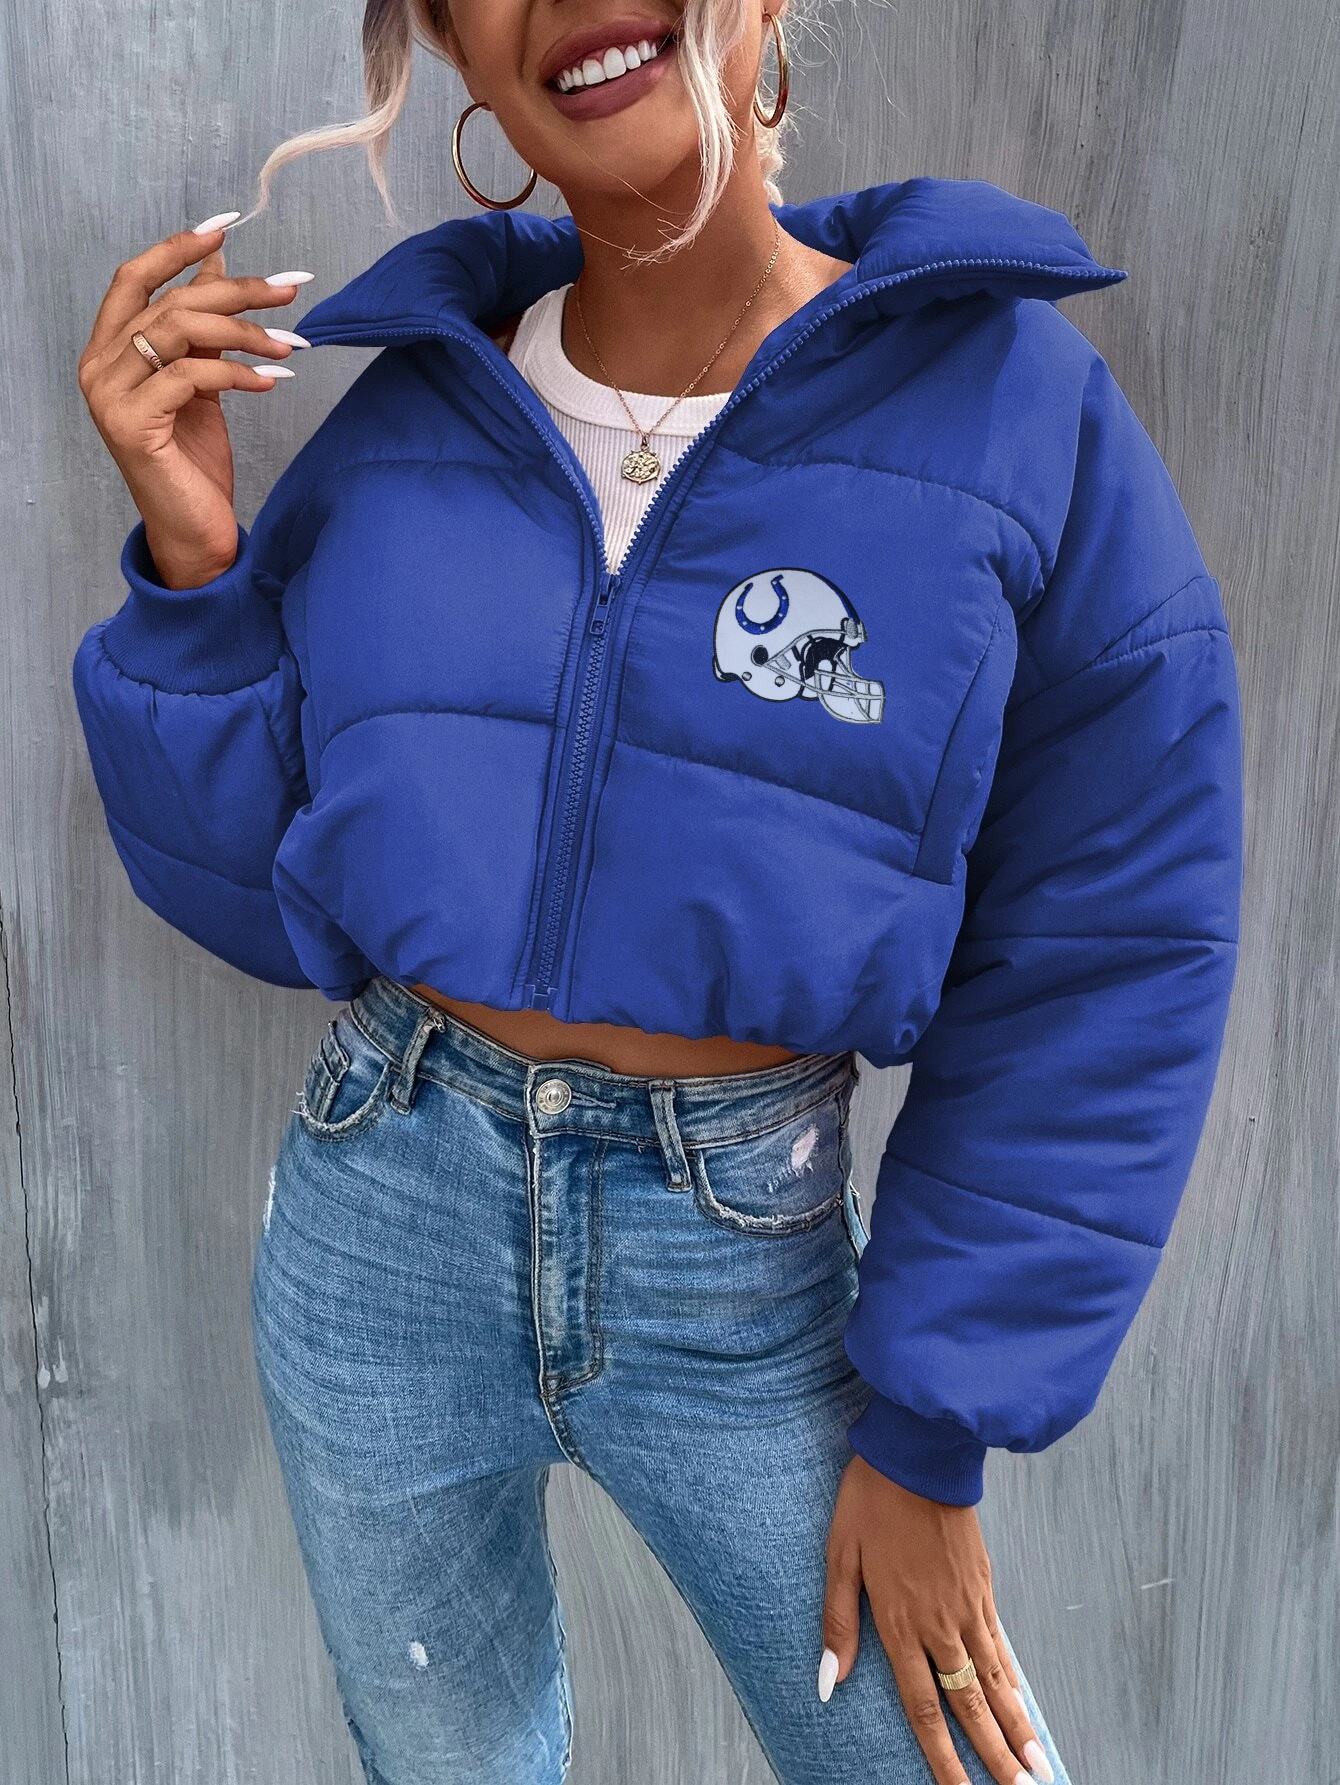 Indianapolis Colts Cropped Puffer Jacket - Vintage NFL Football Women's Winter Coat - Royal Blue, Black, Beige